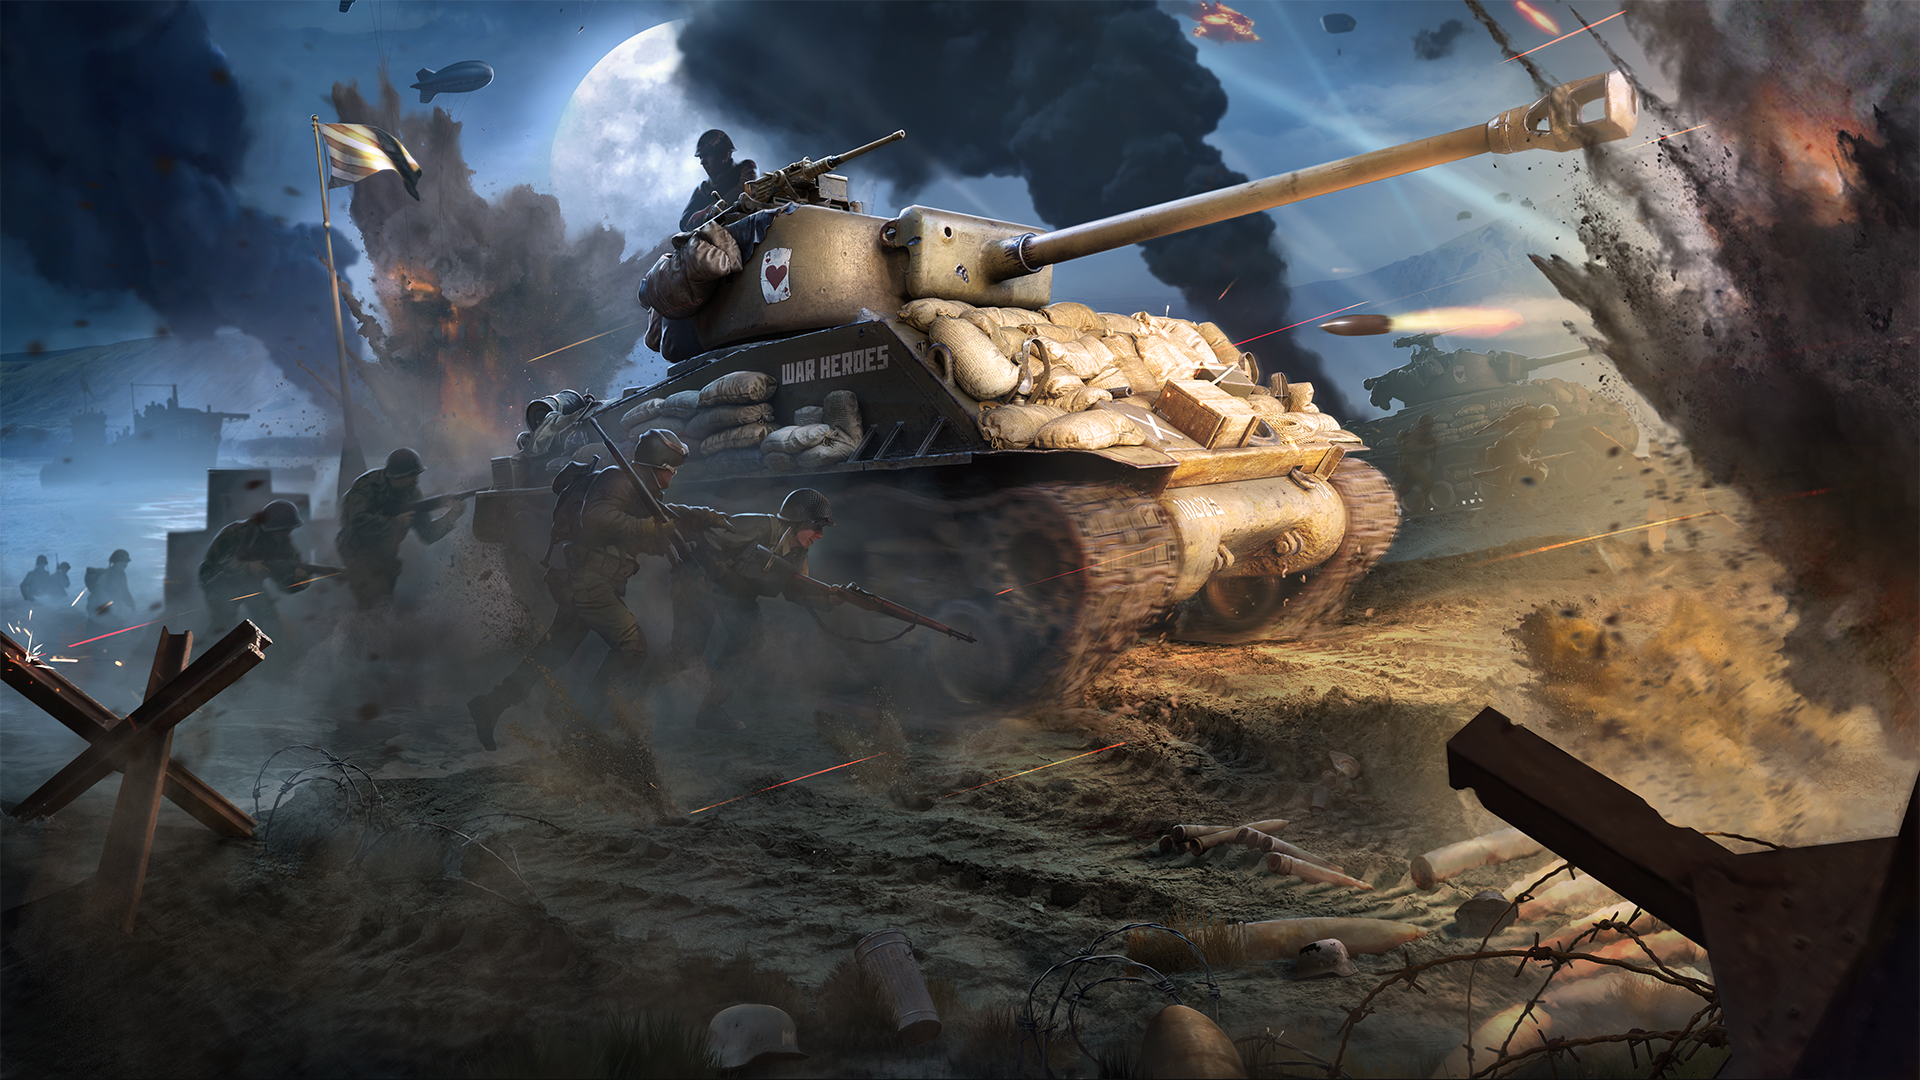 The World of Tanks Roll Out Collector's Edition Xbox One PlayStat 平行輸入  プレイステーション4（PS4）